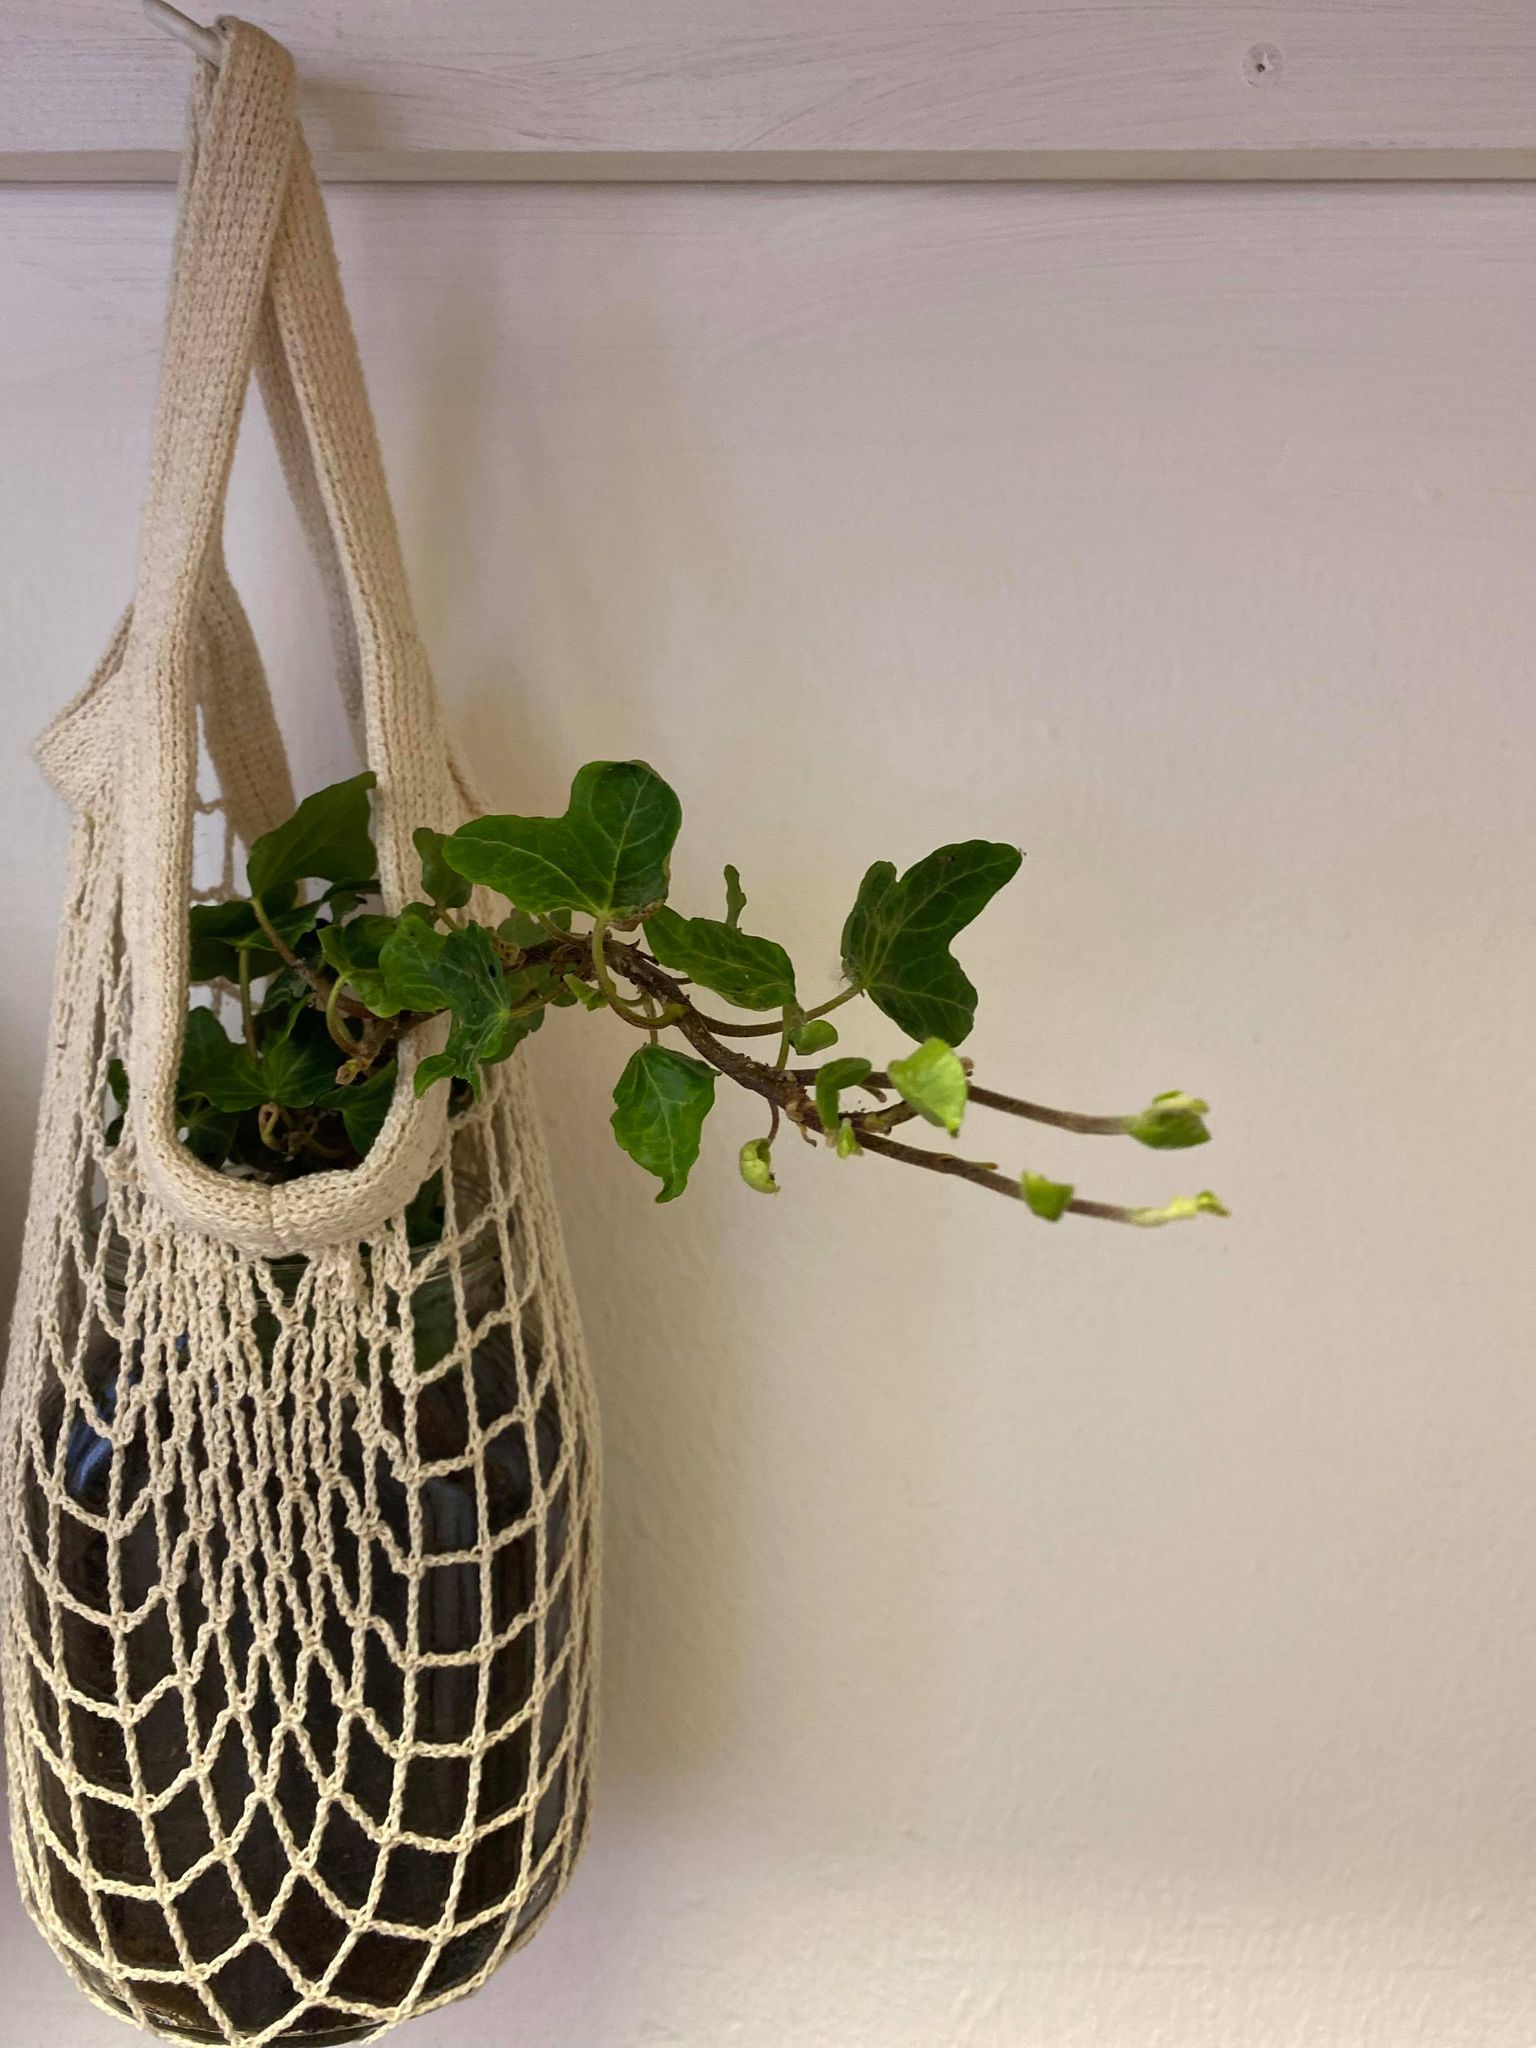 You are currently viewing Macrame: Hanging Plant Holders